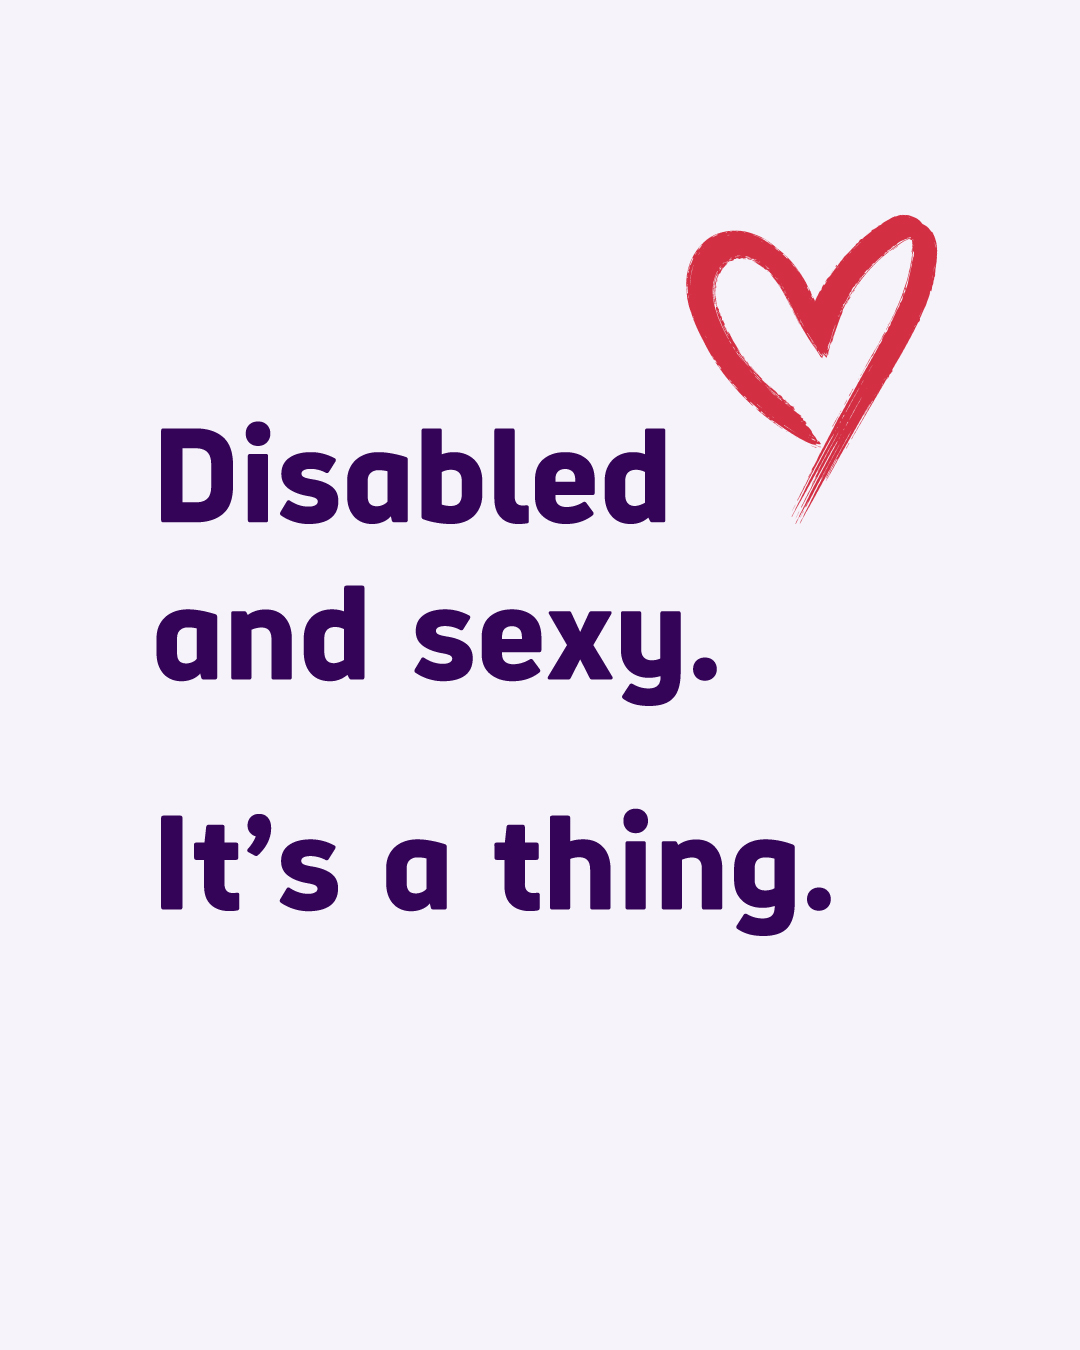 Text: Disabled and sexy. It's a thing.